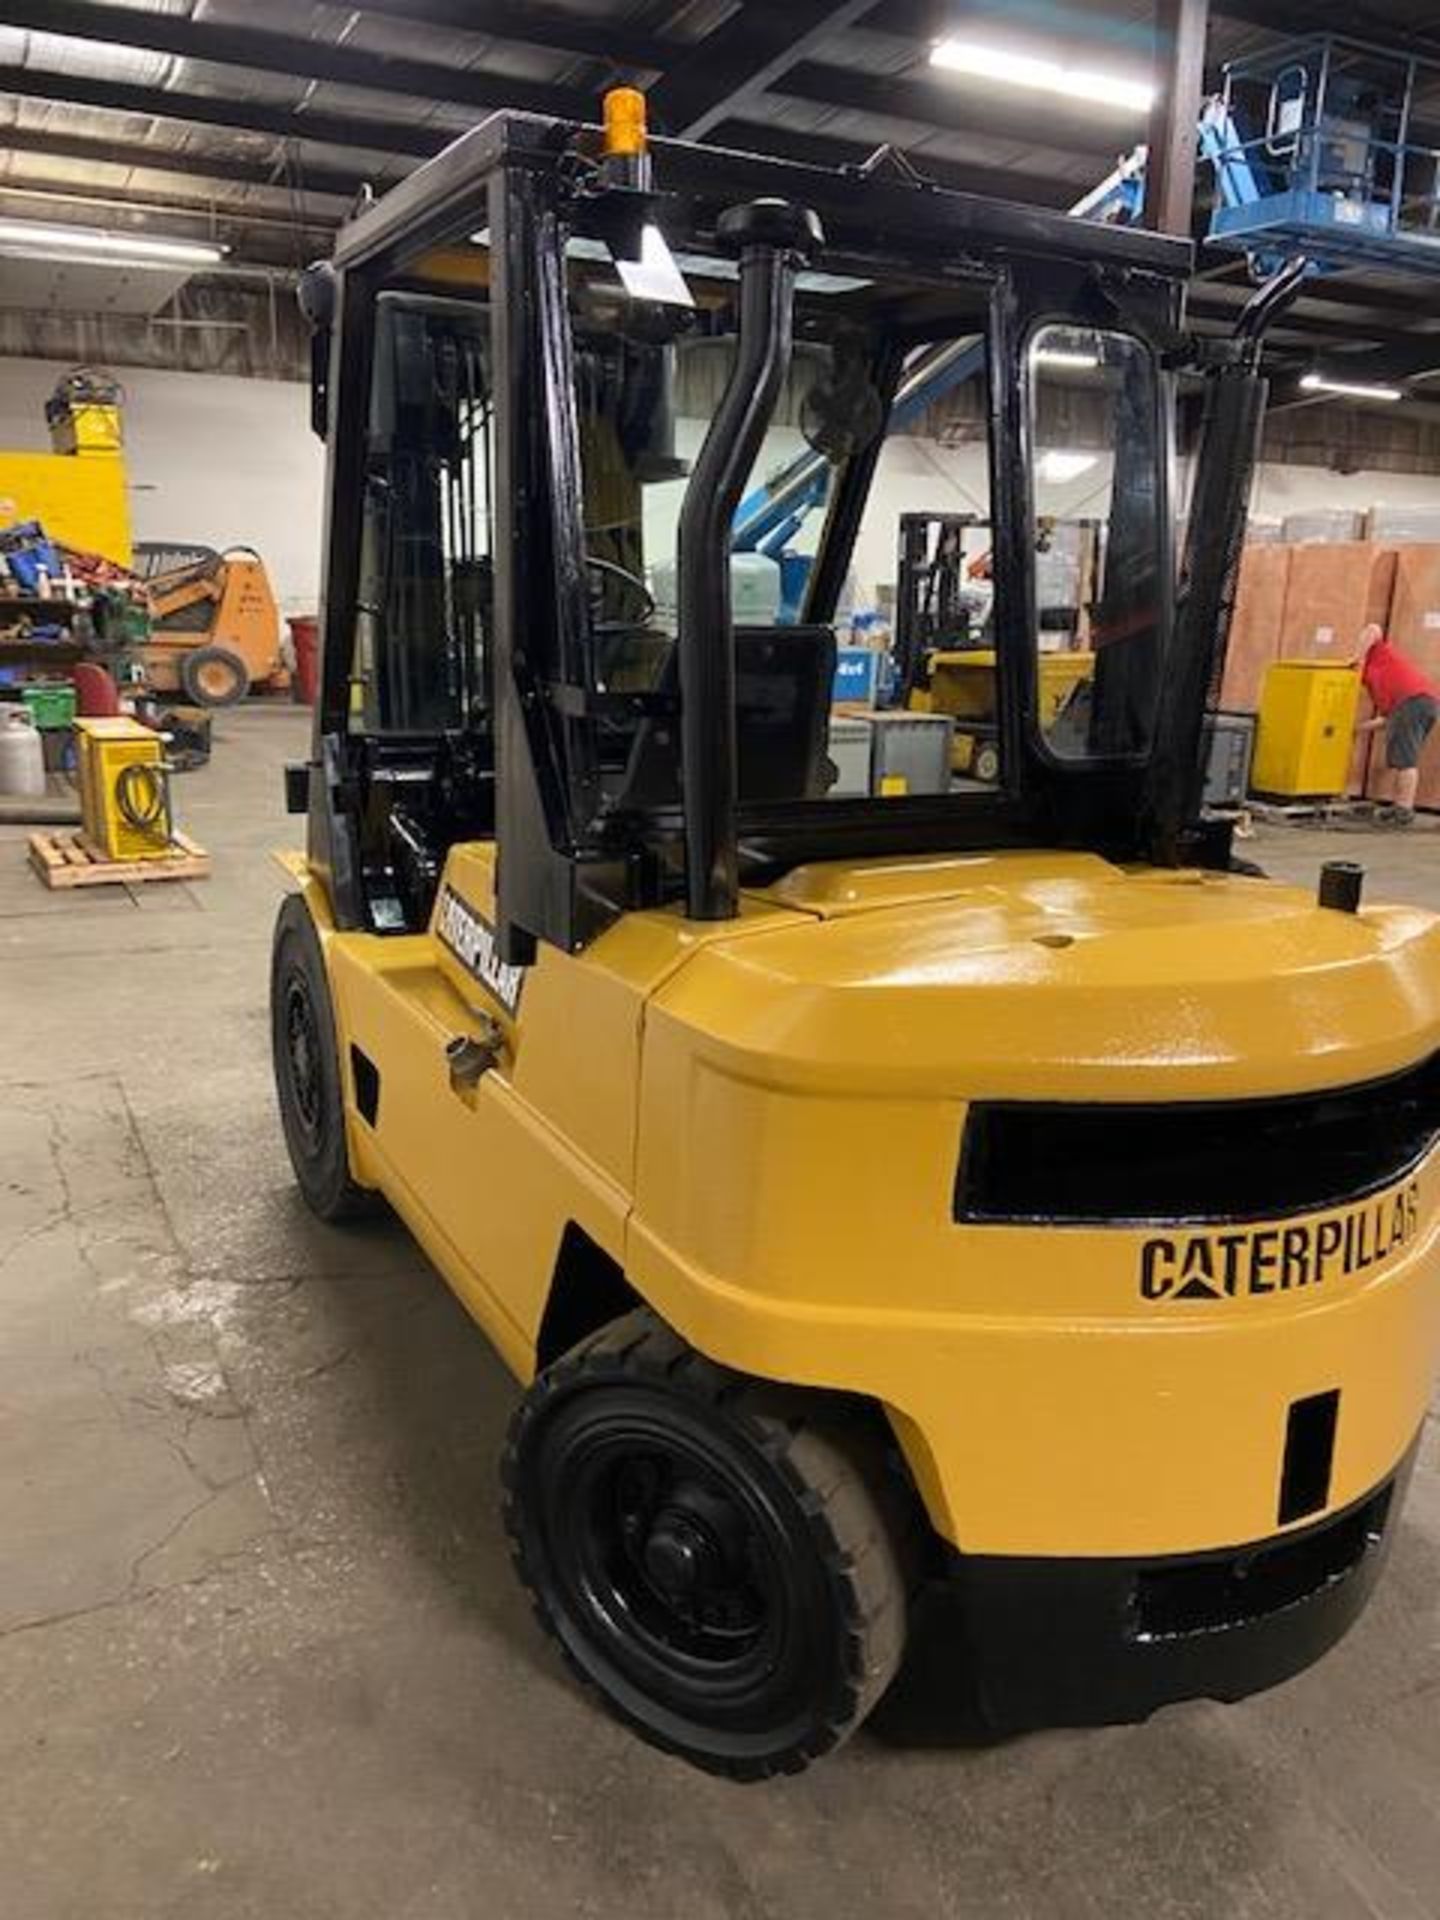 FREE CUSTOMS - Caterpillar 8,000lbs Capacity Diesel OUTDOOR Forklift with 3 stage mast - Image 3 of 3